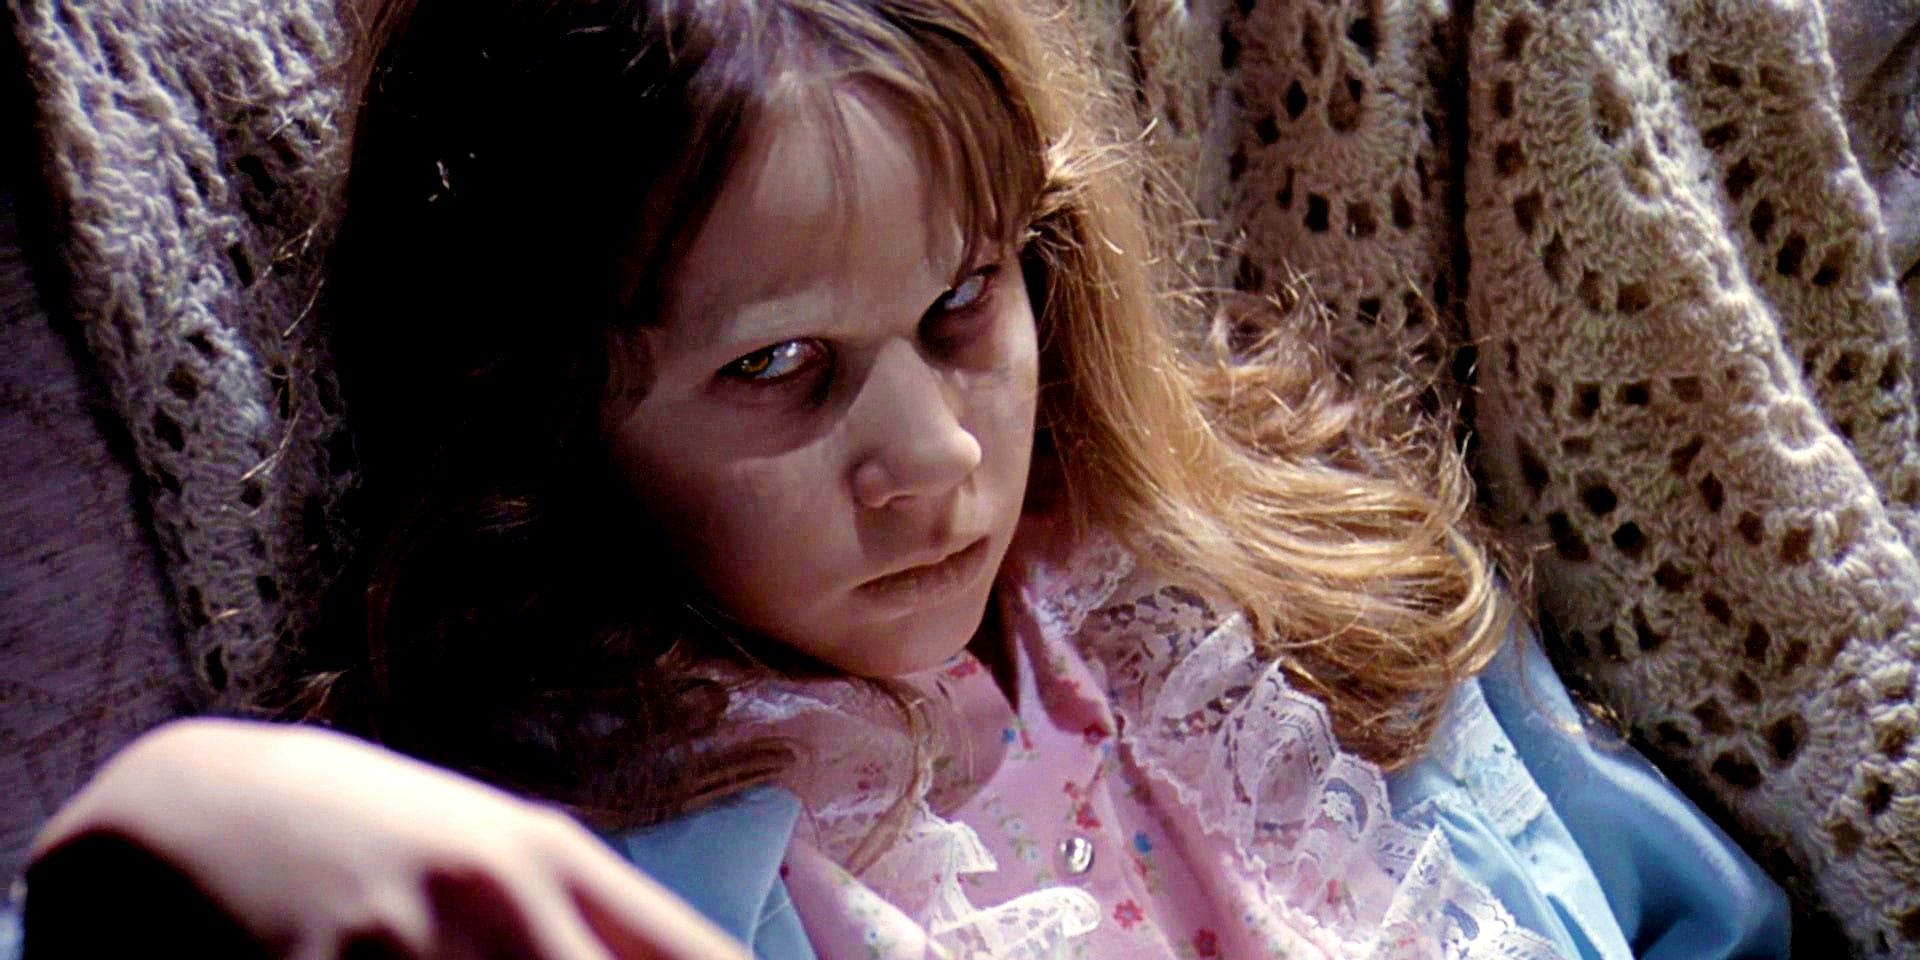 Linda Blair as the possessed child with a creepy stare in The Exorcist